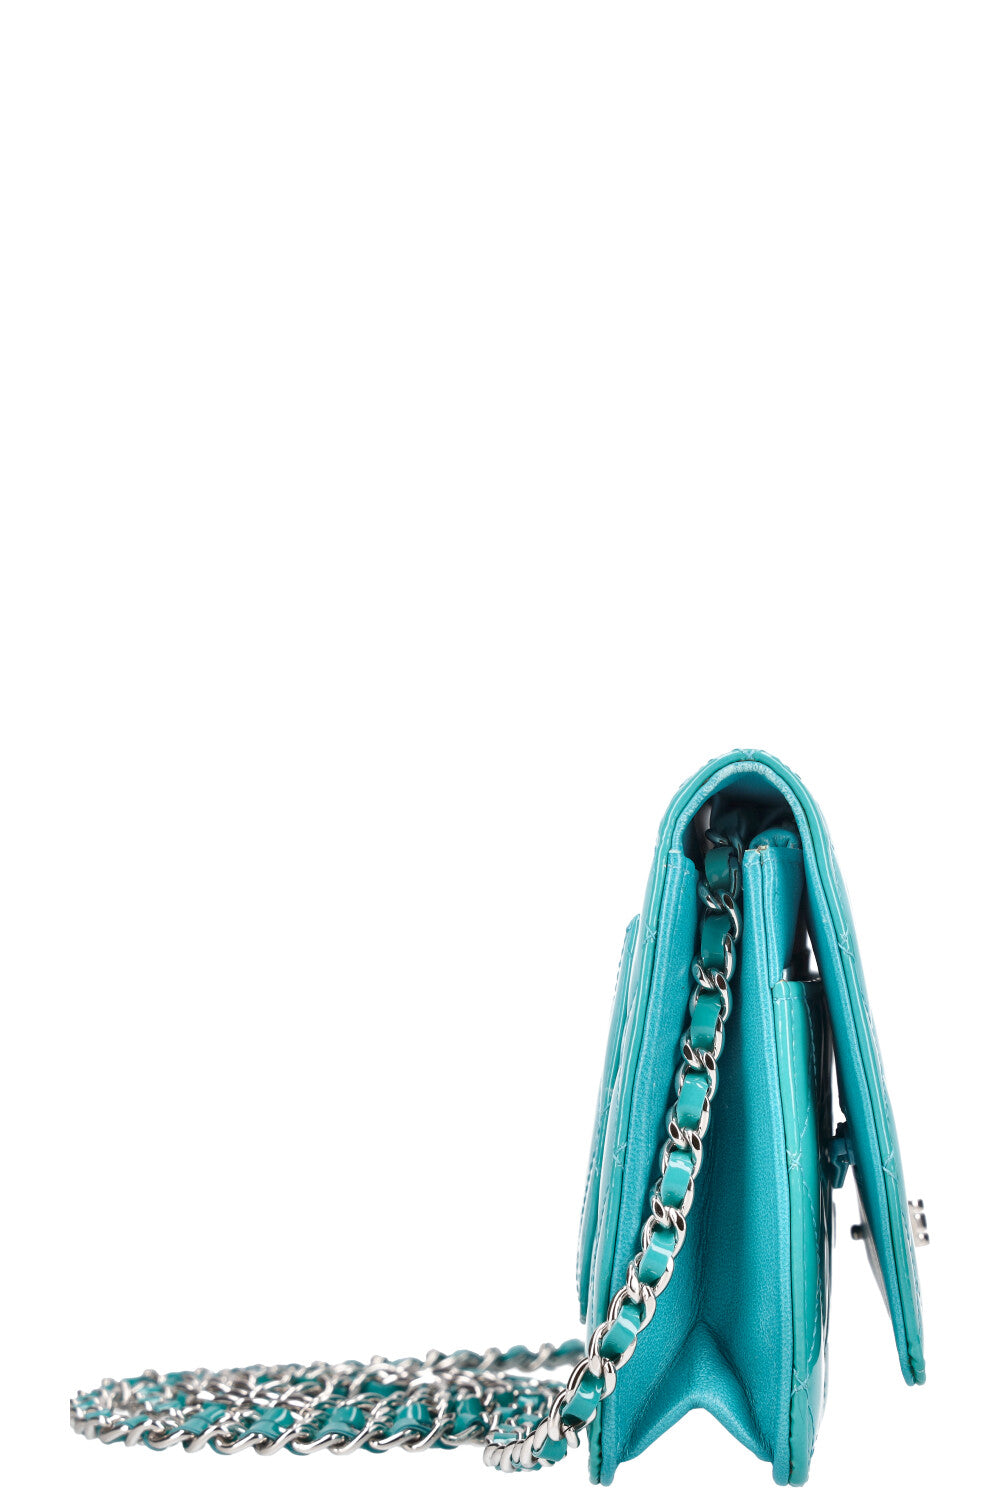 CHANEL 2.55 WOC Patent Leather Turquoise